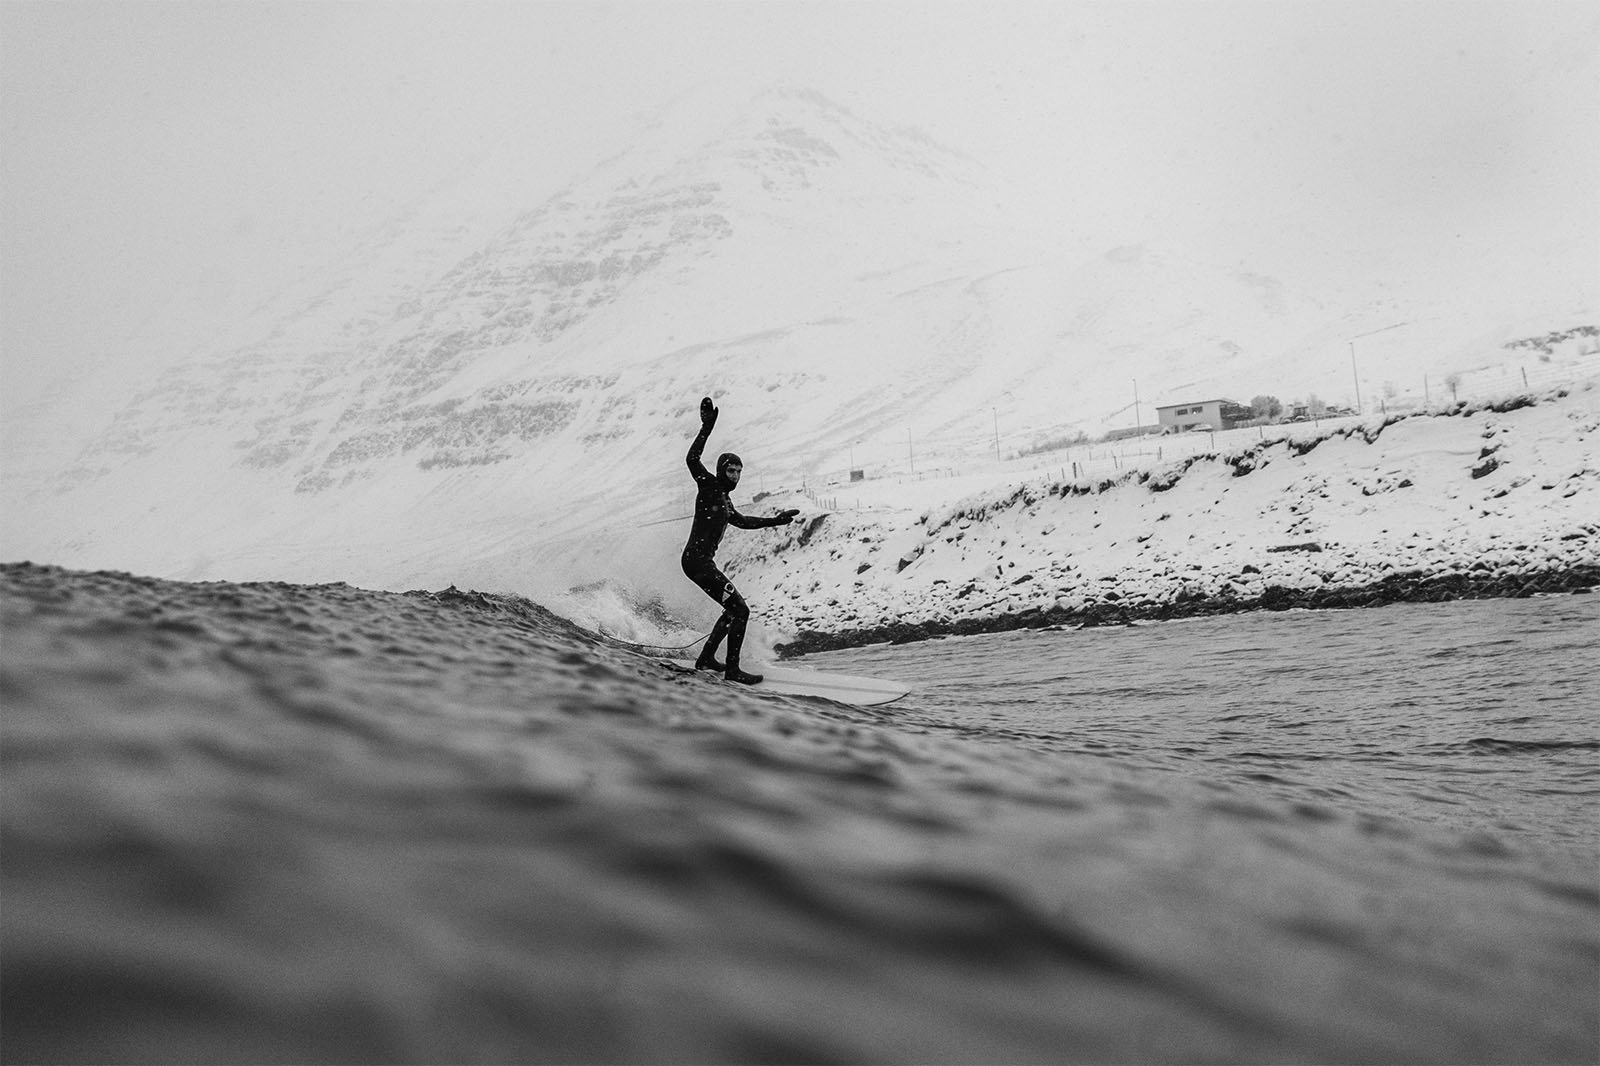 A surfer rides a wave in a wintery landscape, with snow-covered mountains in the background and shore visible. the image captures a moment of contrast between the snowy environment and the aquatic activity.